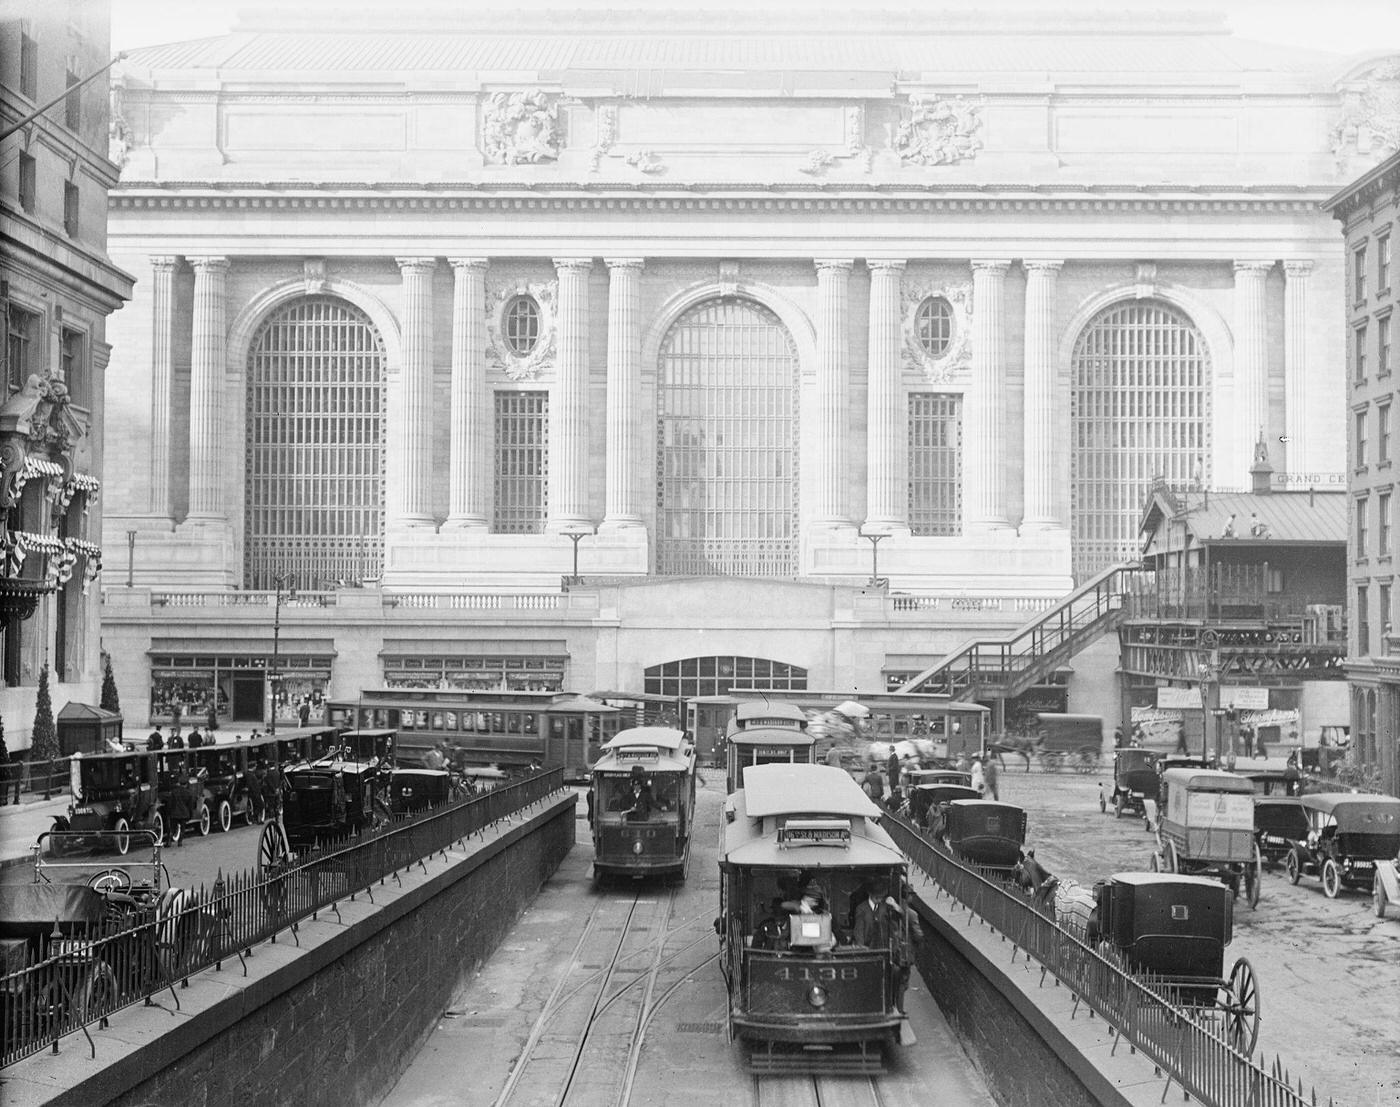 Grand Central Railroad Terminal Exterior, Seen From The Trolley And Auto Overpass, New York City, 1913